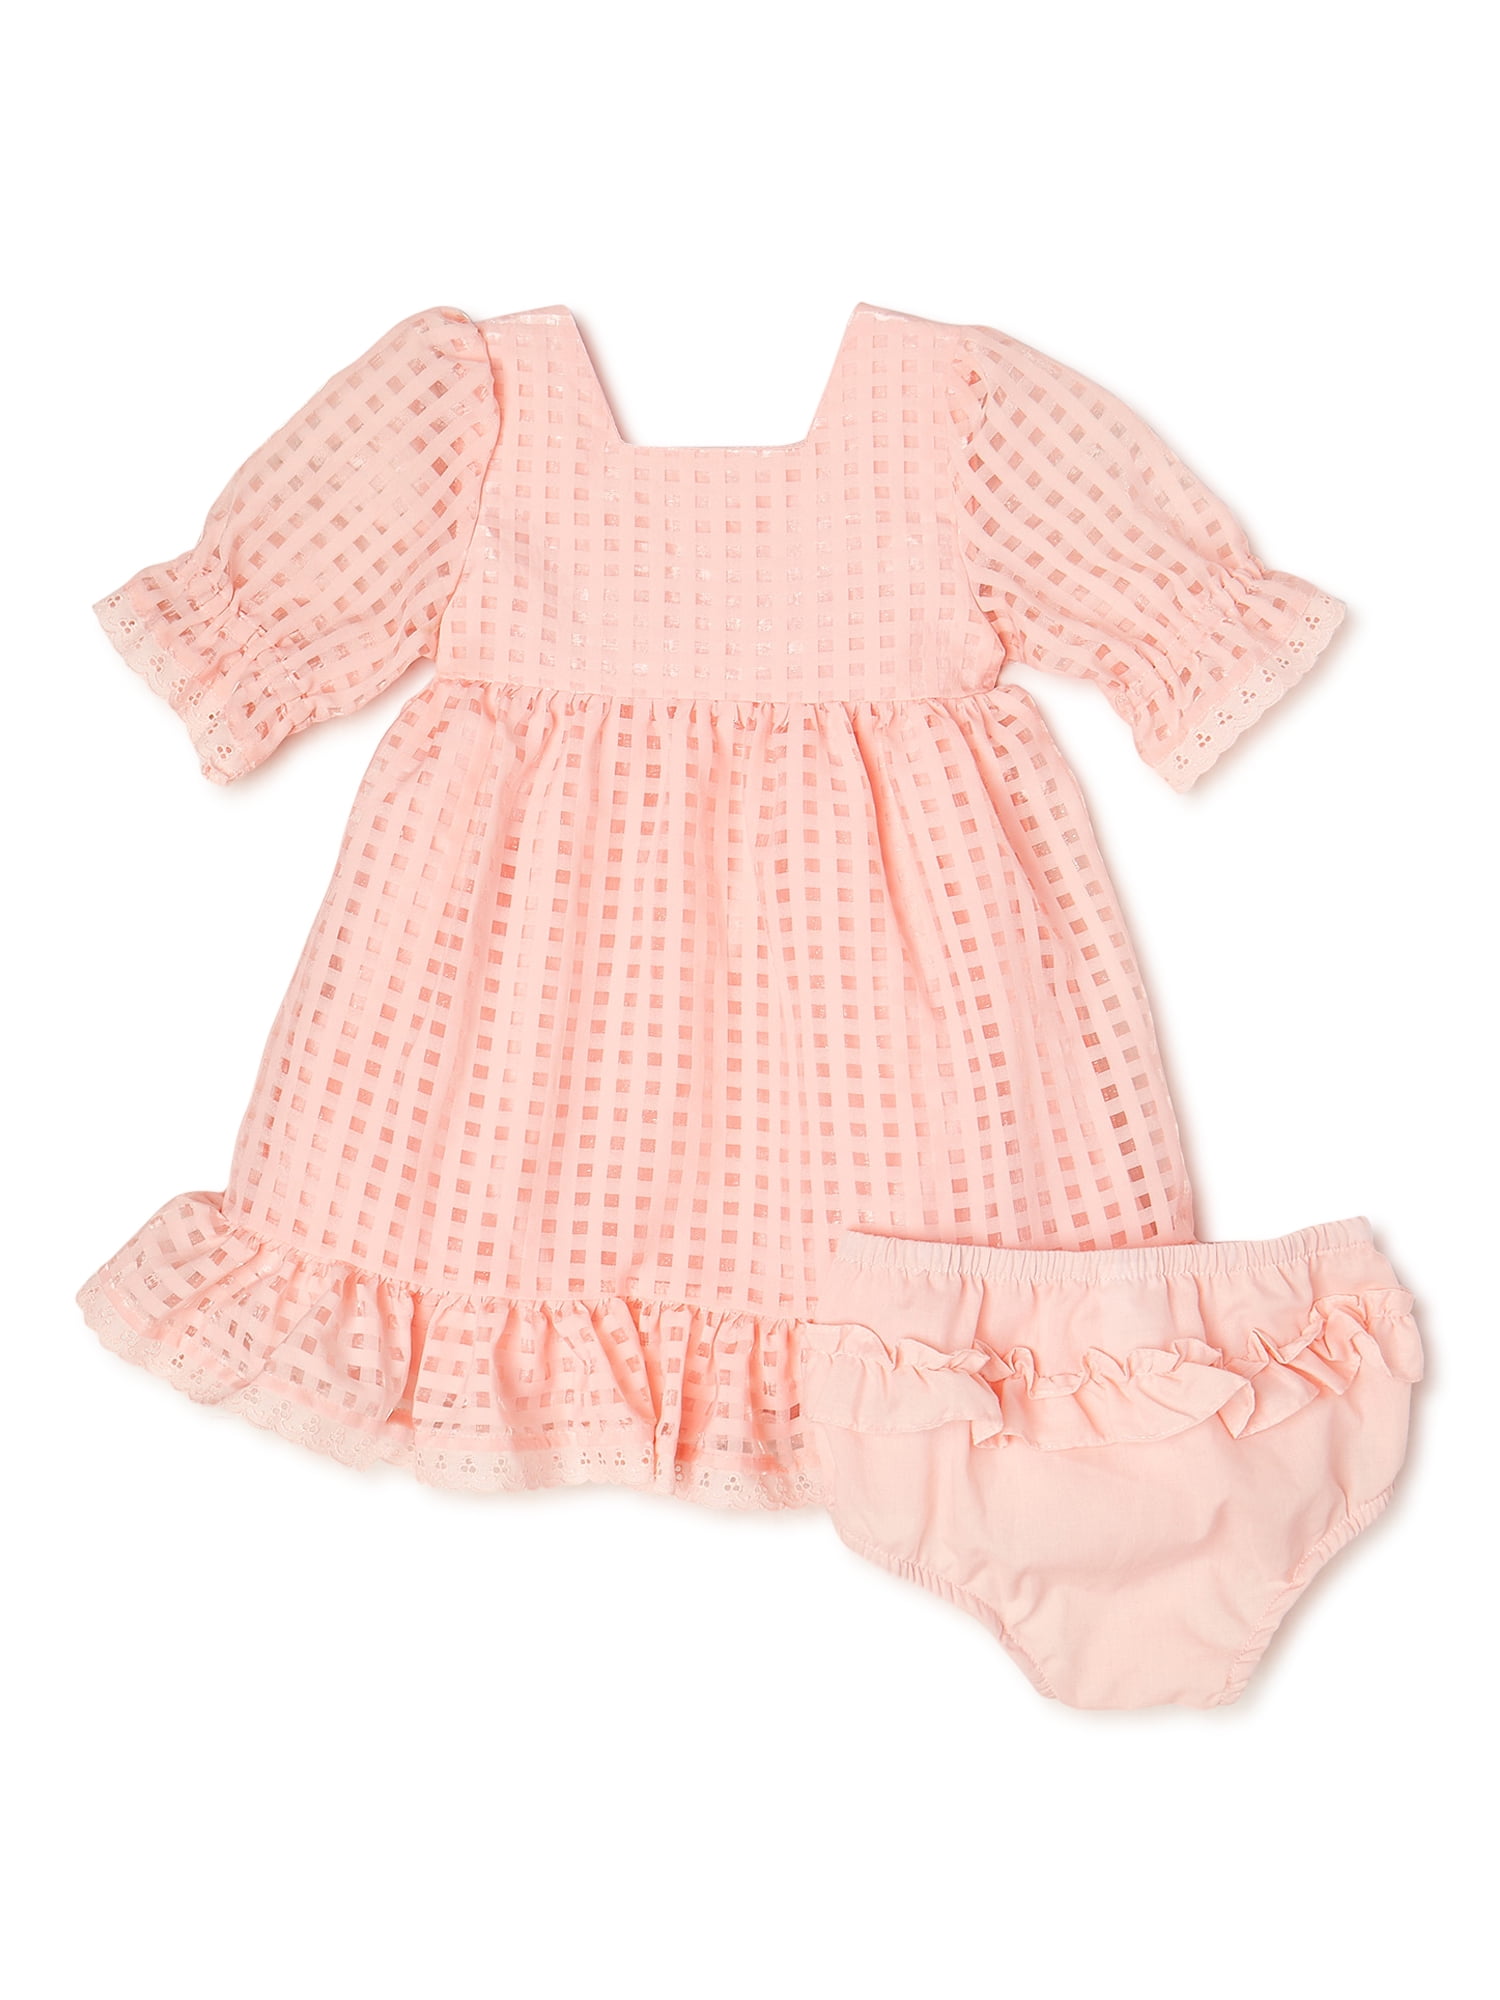 Mothercare 0-3 Months Baby Girl Dress Mothercare 100% Cotton Pink White Summer Holiday 